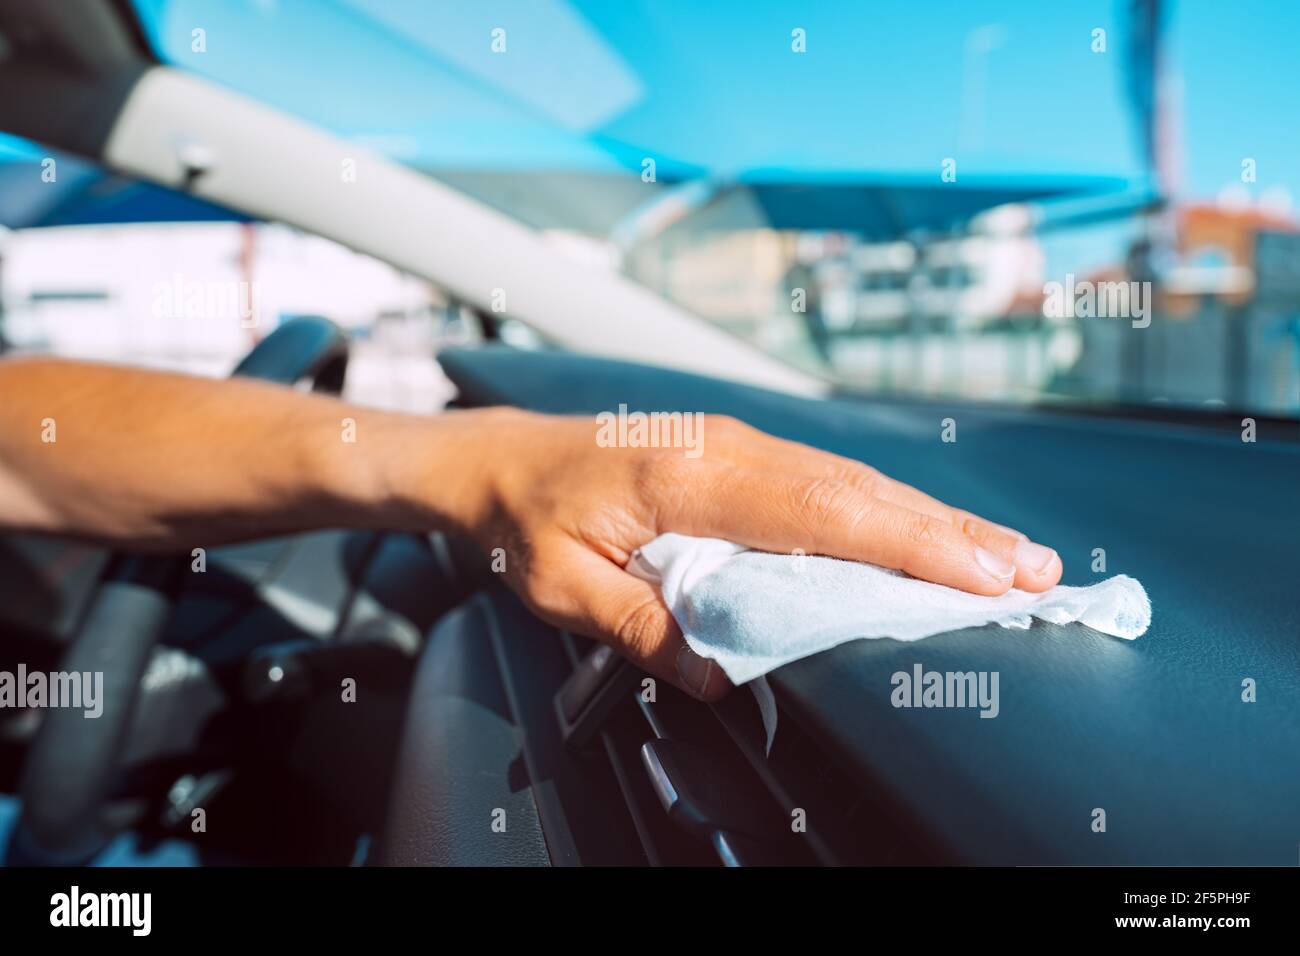 Closeup of man hand with antivirus antibacterial wet wipe or napkin cleaning car panel. Man disinfecting car salon from bacteria and virus Stock Photo